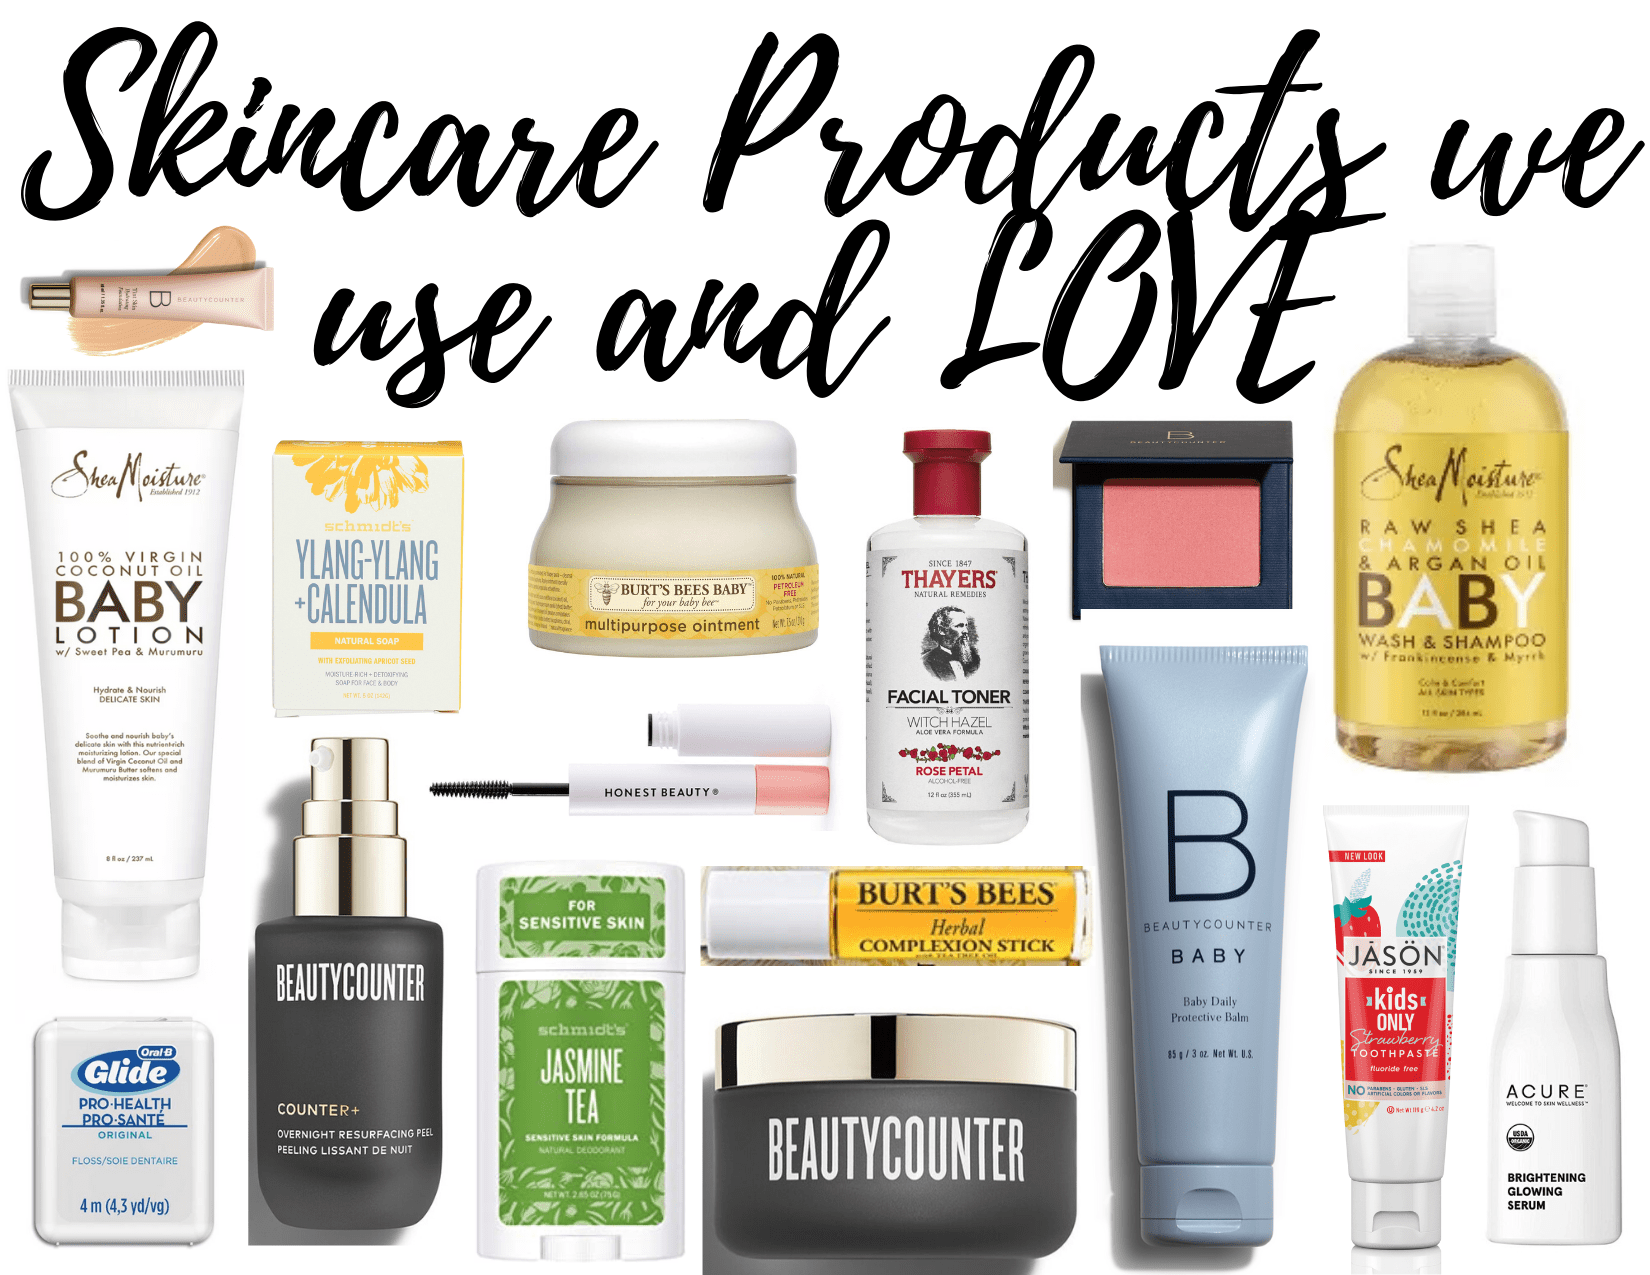 skincare products woman love to use